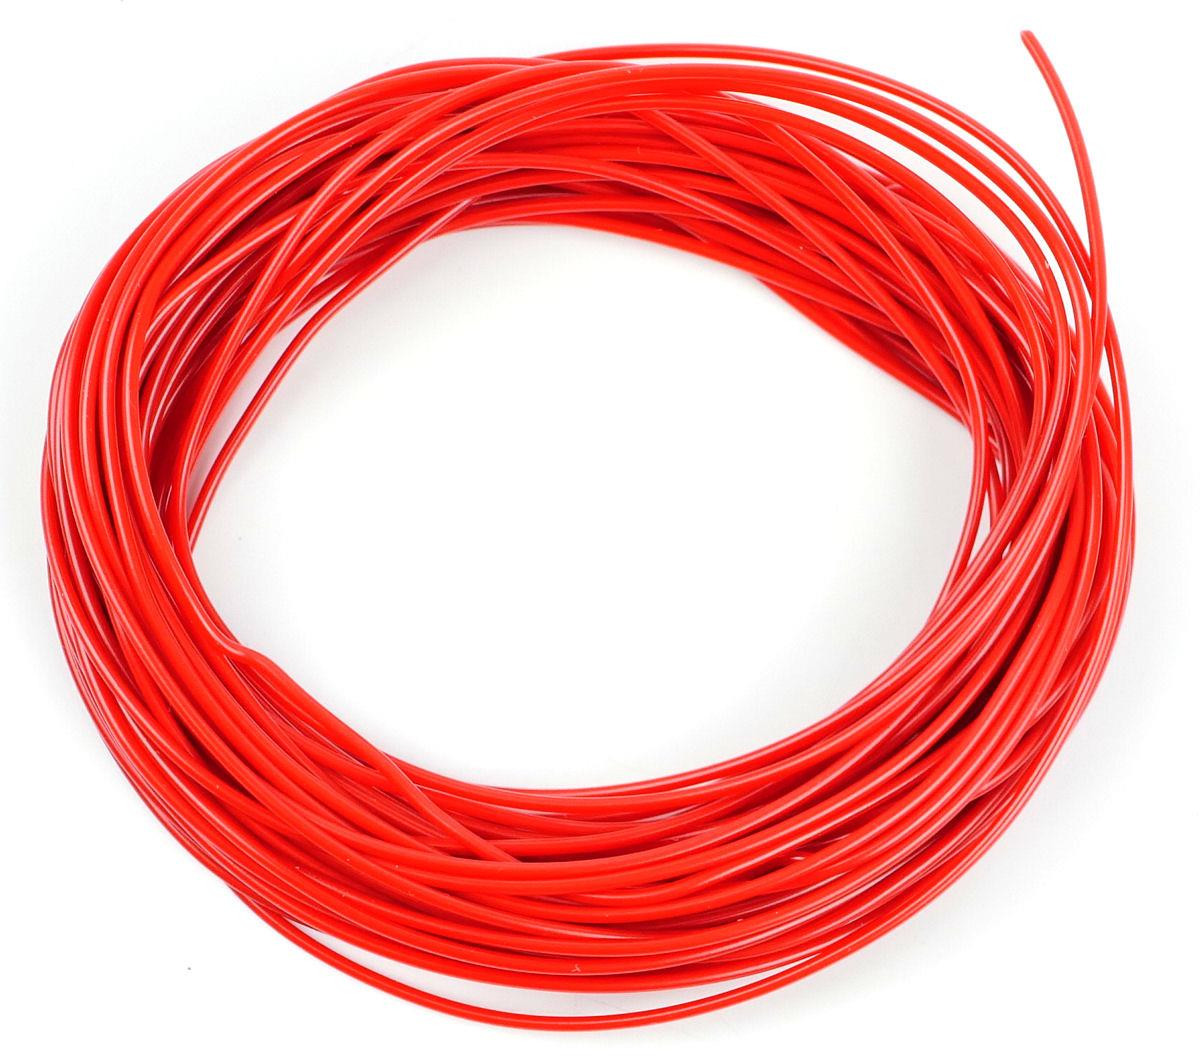 10 METRES HORNBY PECO BACHMANN RED/BLACK 7/02mm TRAIN TRACK  LAYOUT HOOK UP WIRE 